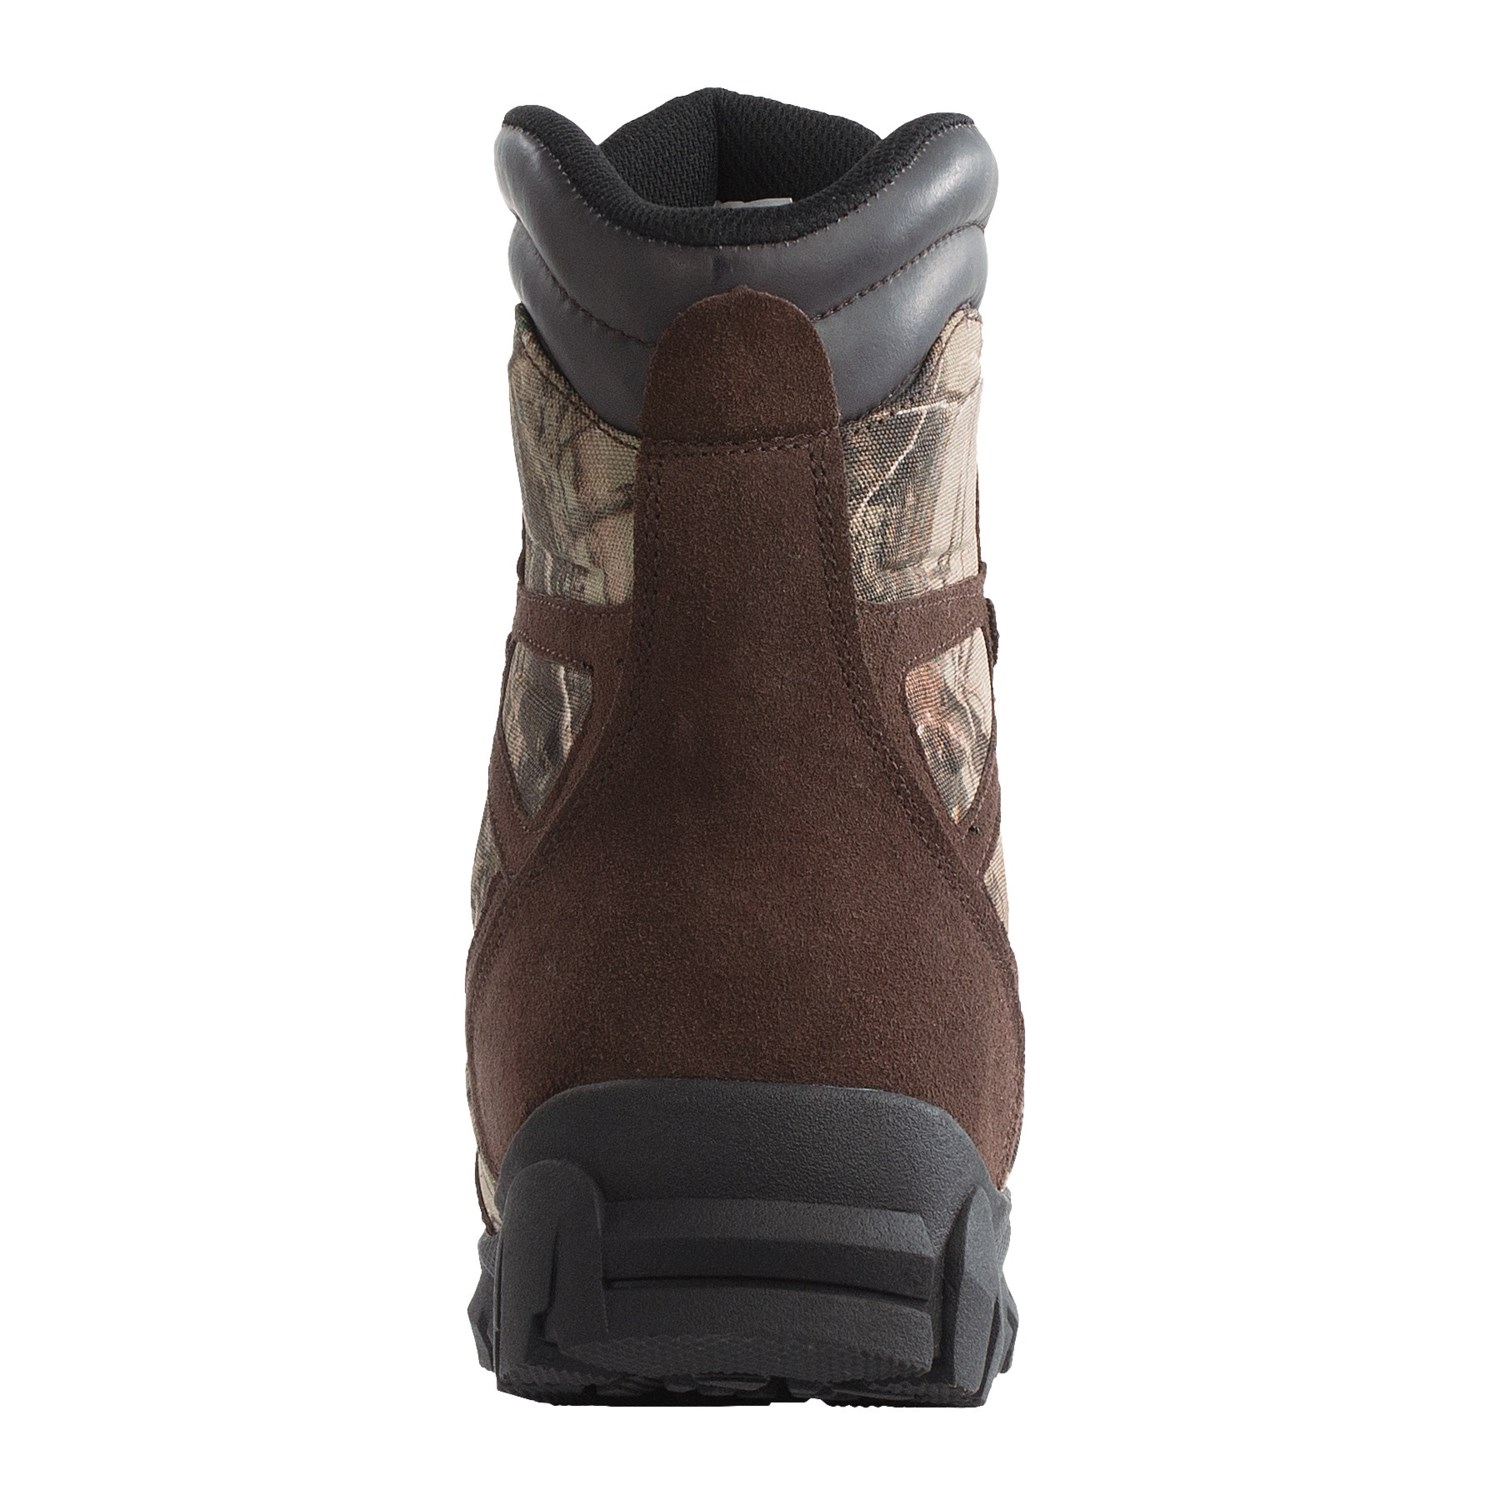 Itasca Recoil Hunting Boots (For Men) 8796V - Save 50%